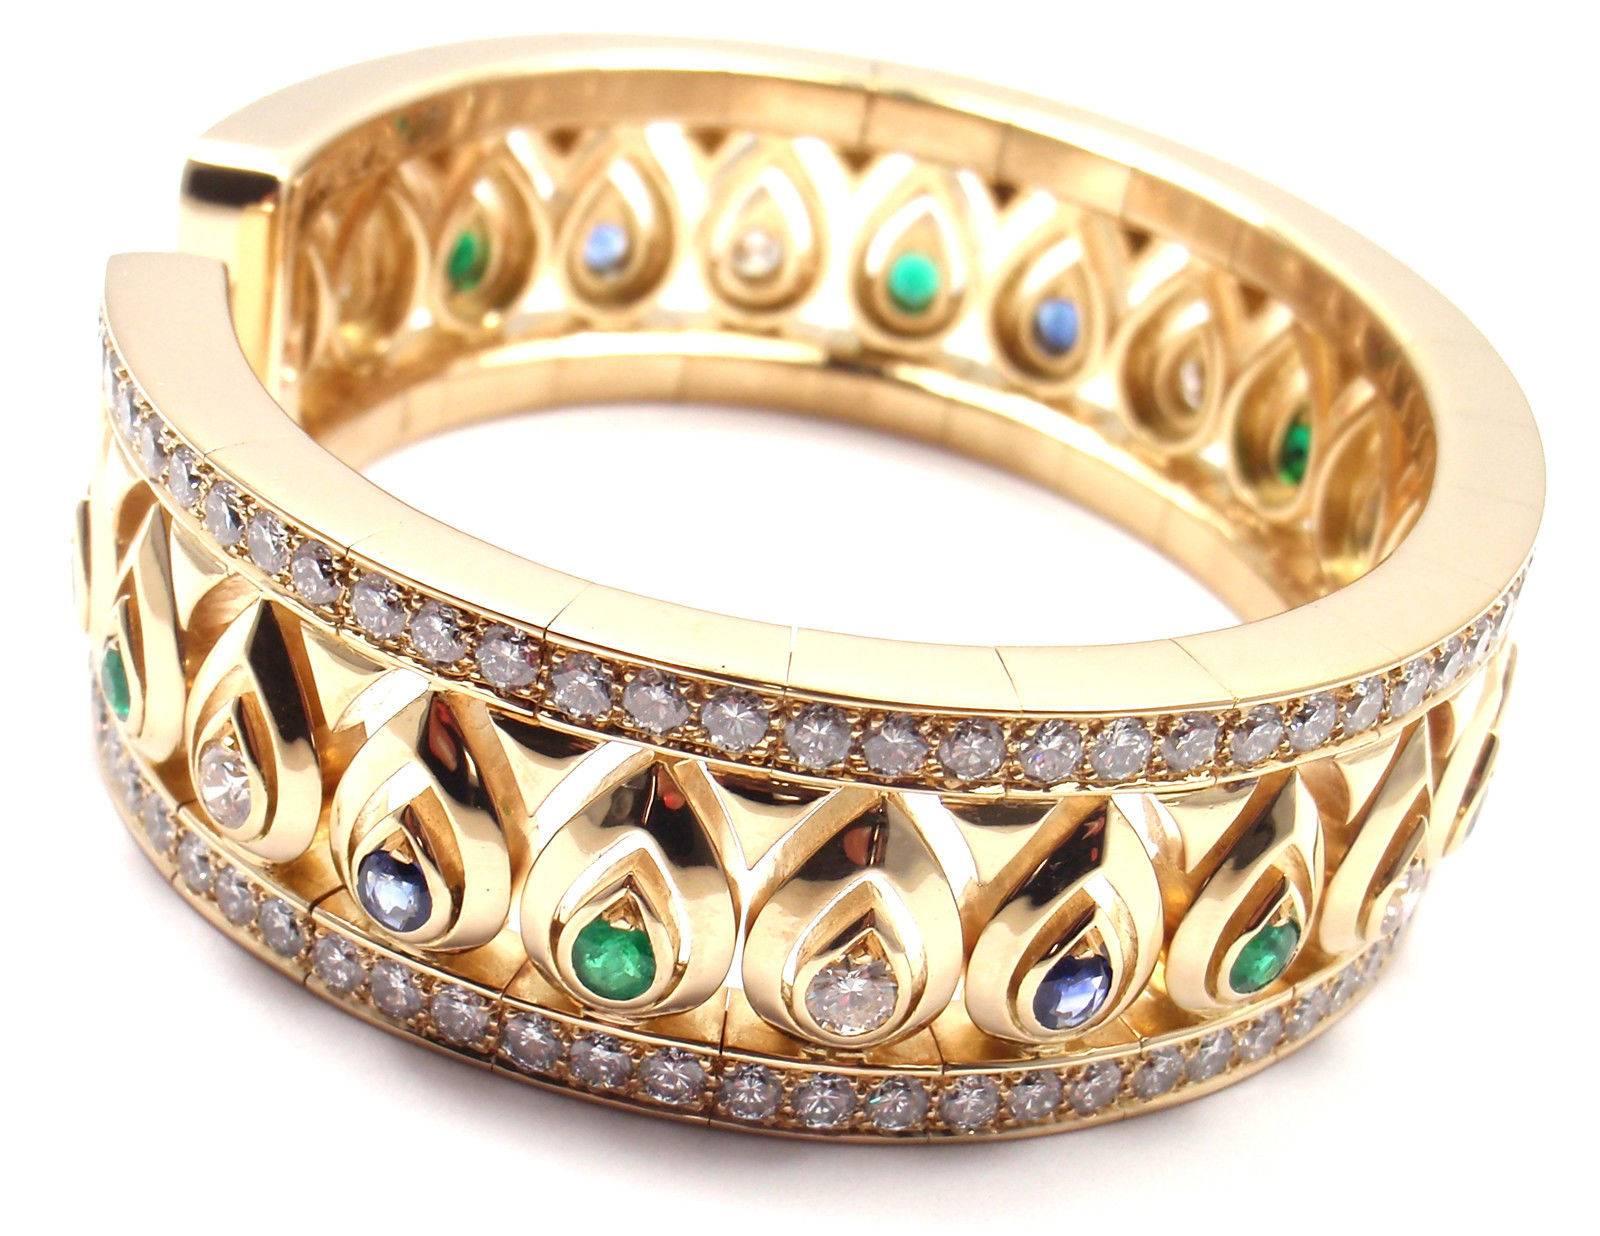 18k Yellow Gold Diamond Sapphire Emerald Cuff Bangle Bracelet by Cartier. 
 With 151 round brilliant cut diamonds VVS1 clarity, E color total weight approx. 7.70ct
8 round sapphires 4mm each
7 round emeralds 4mm each
 
 Details:
 Length: 7